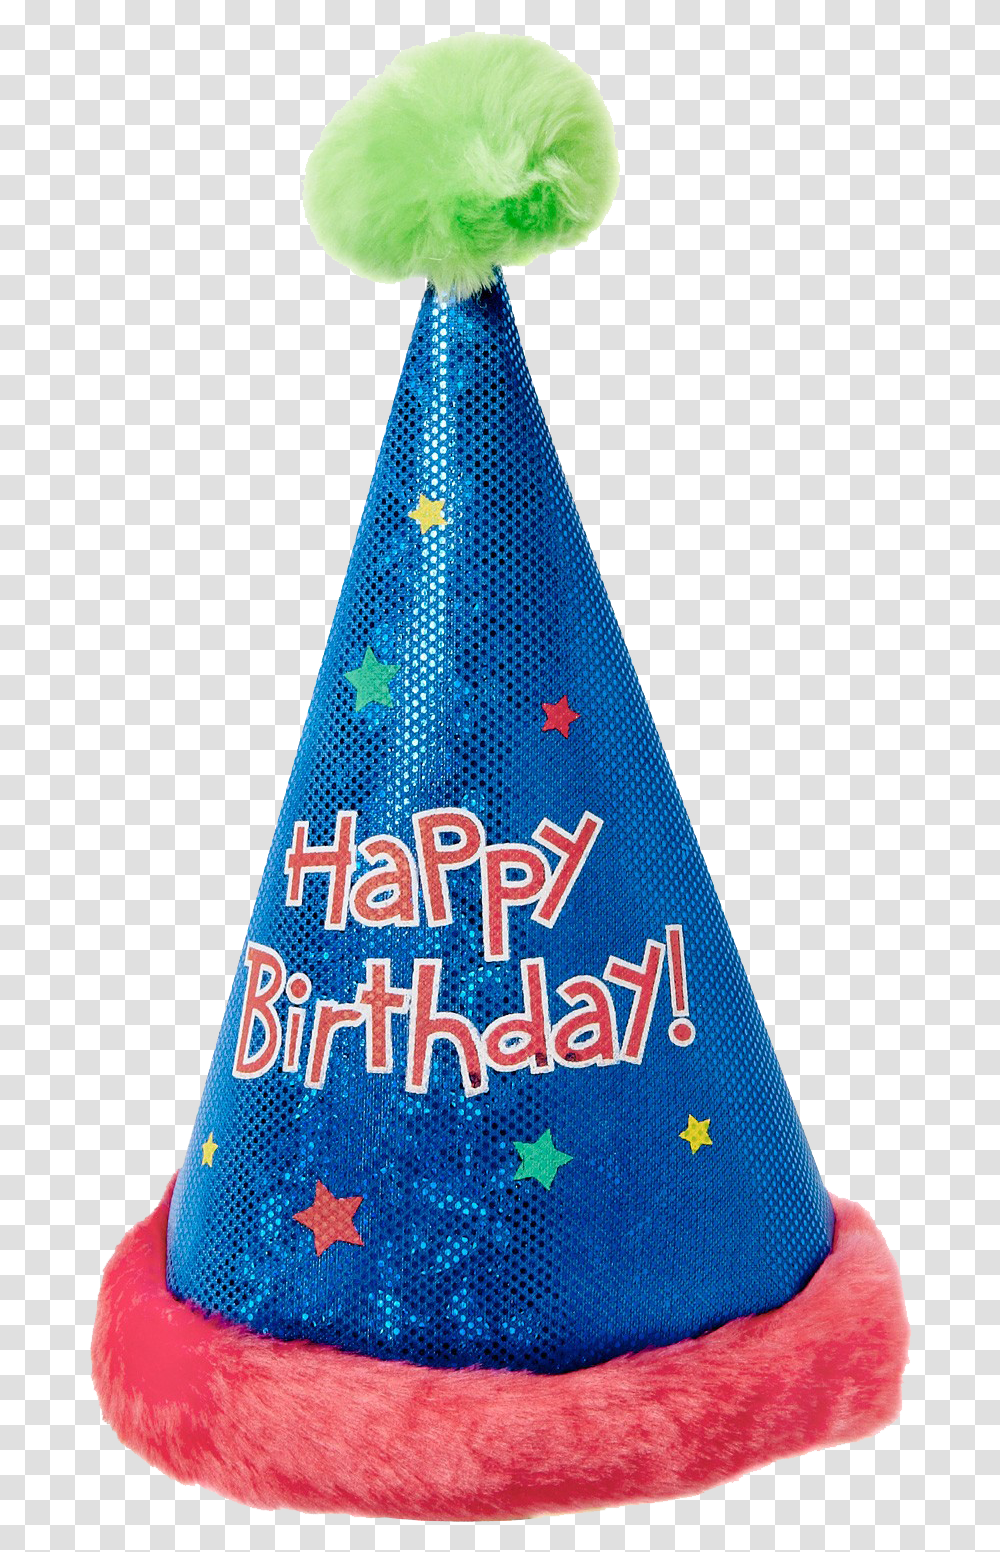 Birthday Hat Background Birthday Cap Hd, Apparel, Party Hat, Cone Transparent Png